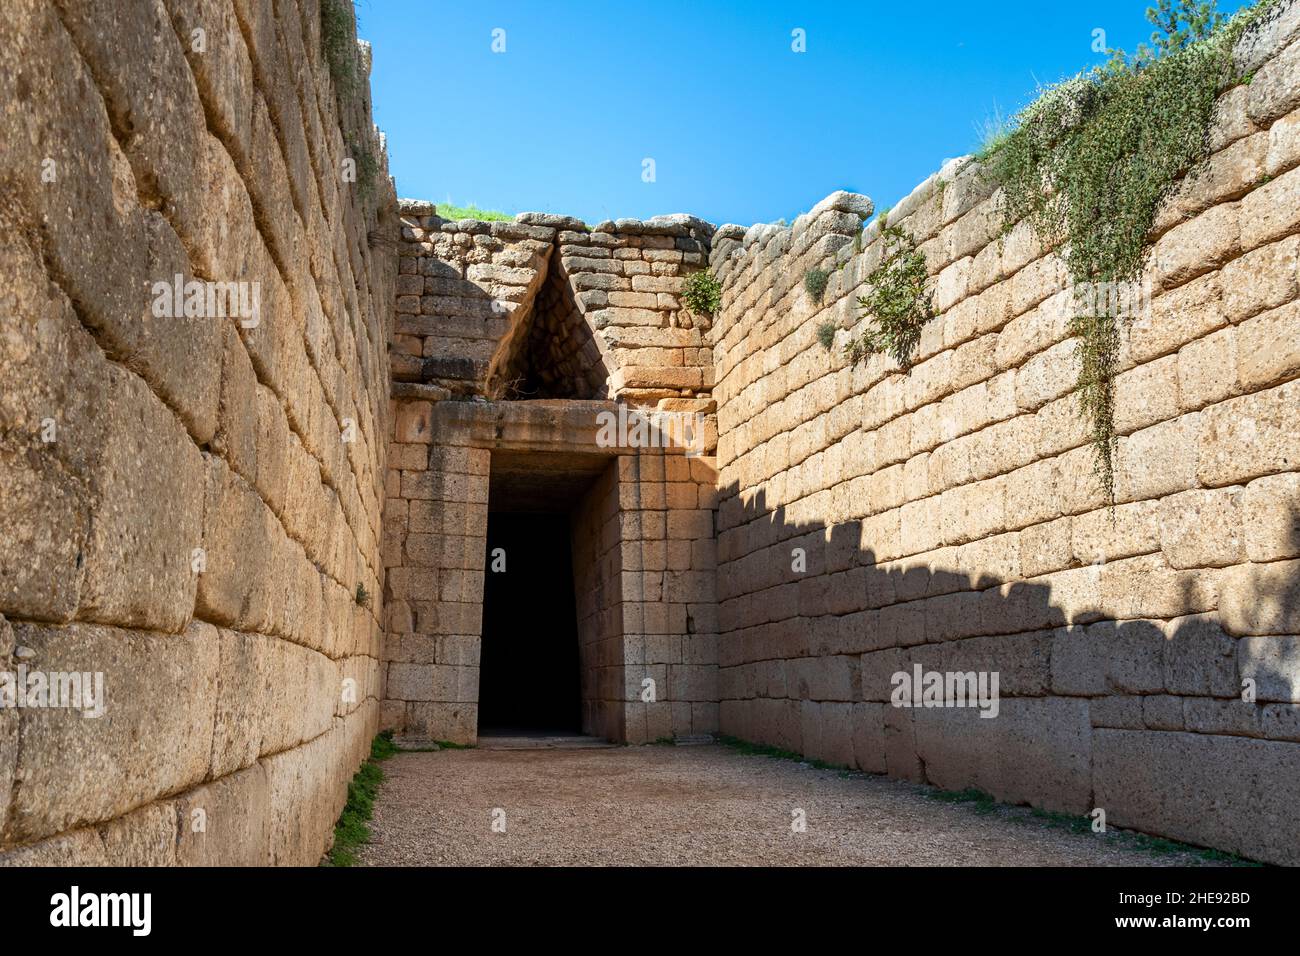 The Tomb of Clytemnestra was a Mycenaean tholos type tomb built in c. 1250 BC outside of Mycenae, Greece. Stock Photo